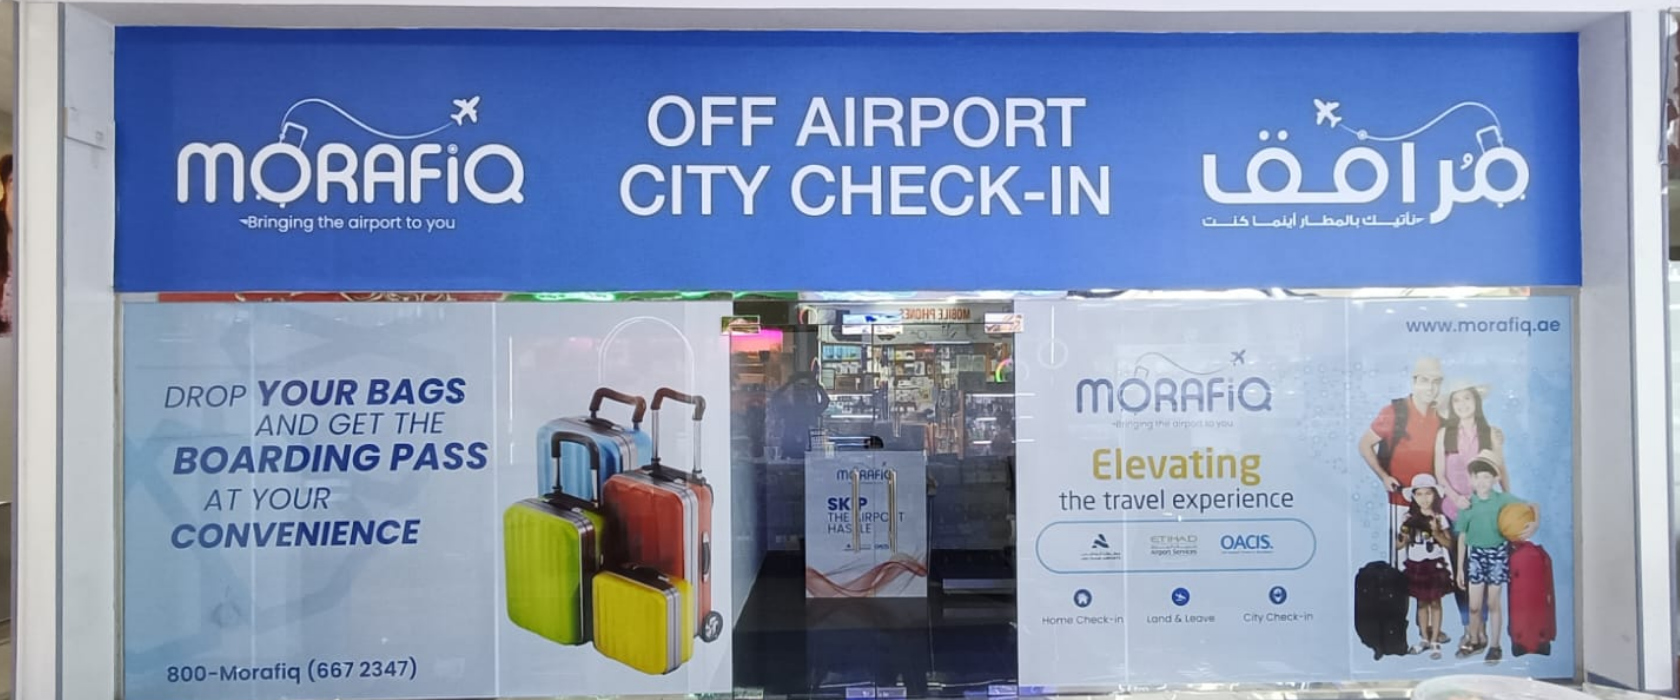 Image of a storefront labeled "Morafiq" offering off-airport city check-in services. The window display includes multiple luggage bags and a sign reading, "Drop your bags and get the boarding pass at your convenience." The colors are primarily blue and white.